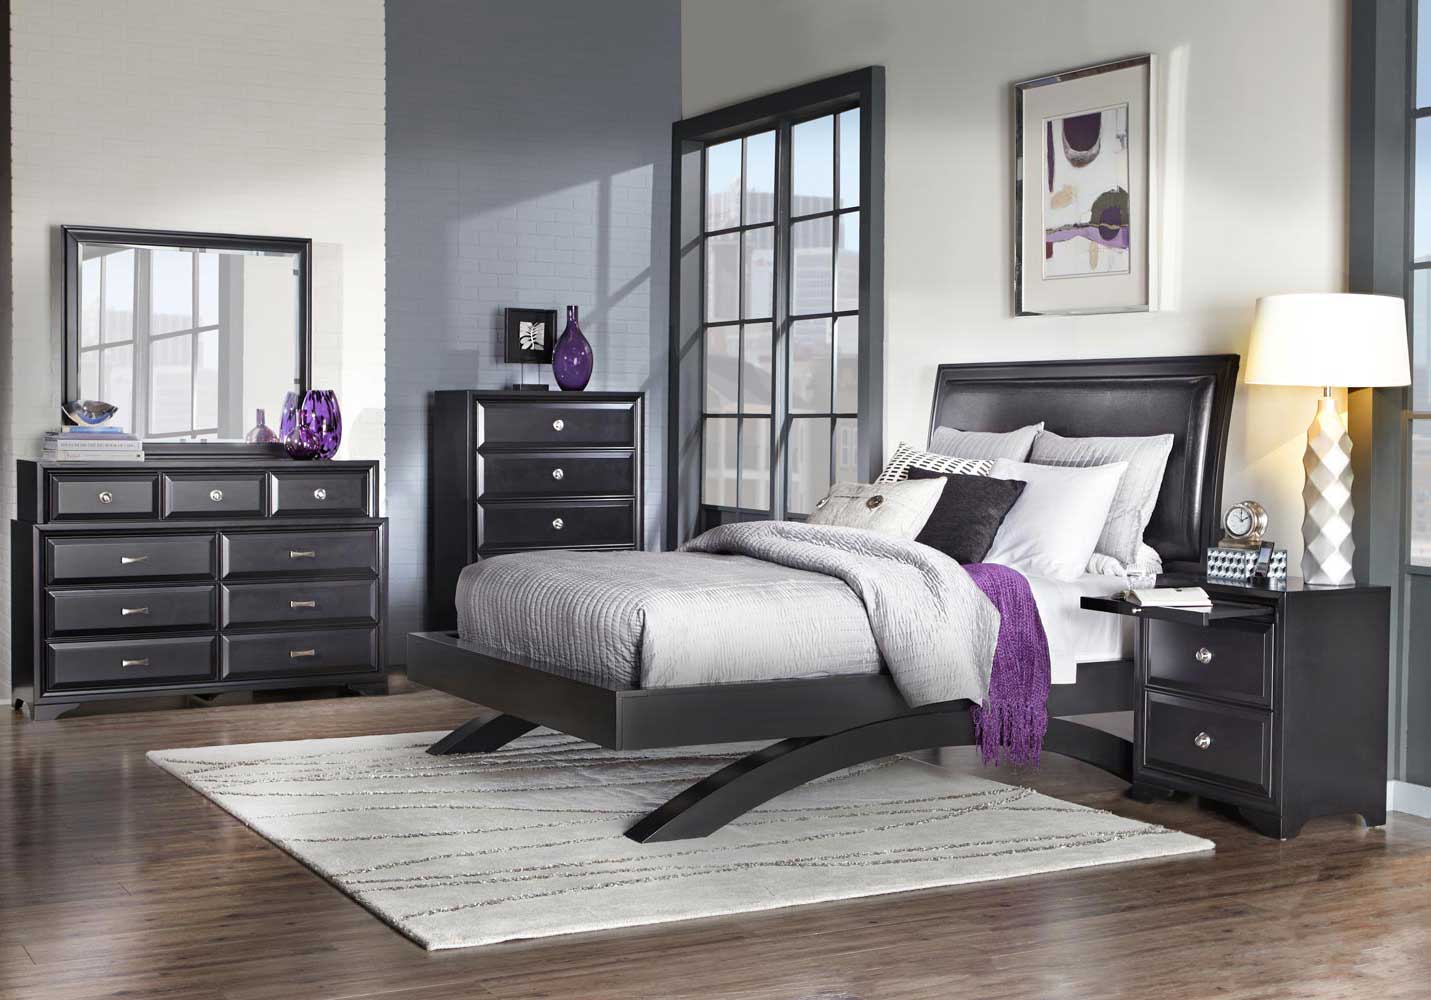 Stores For Bedroom Decoration